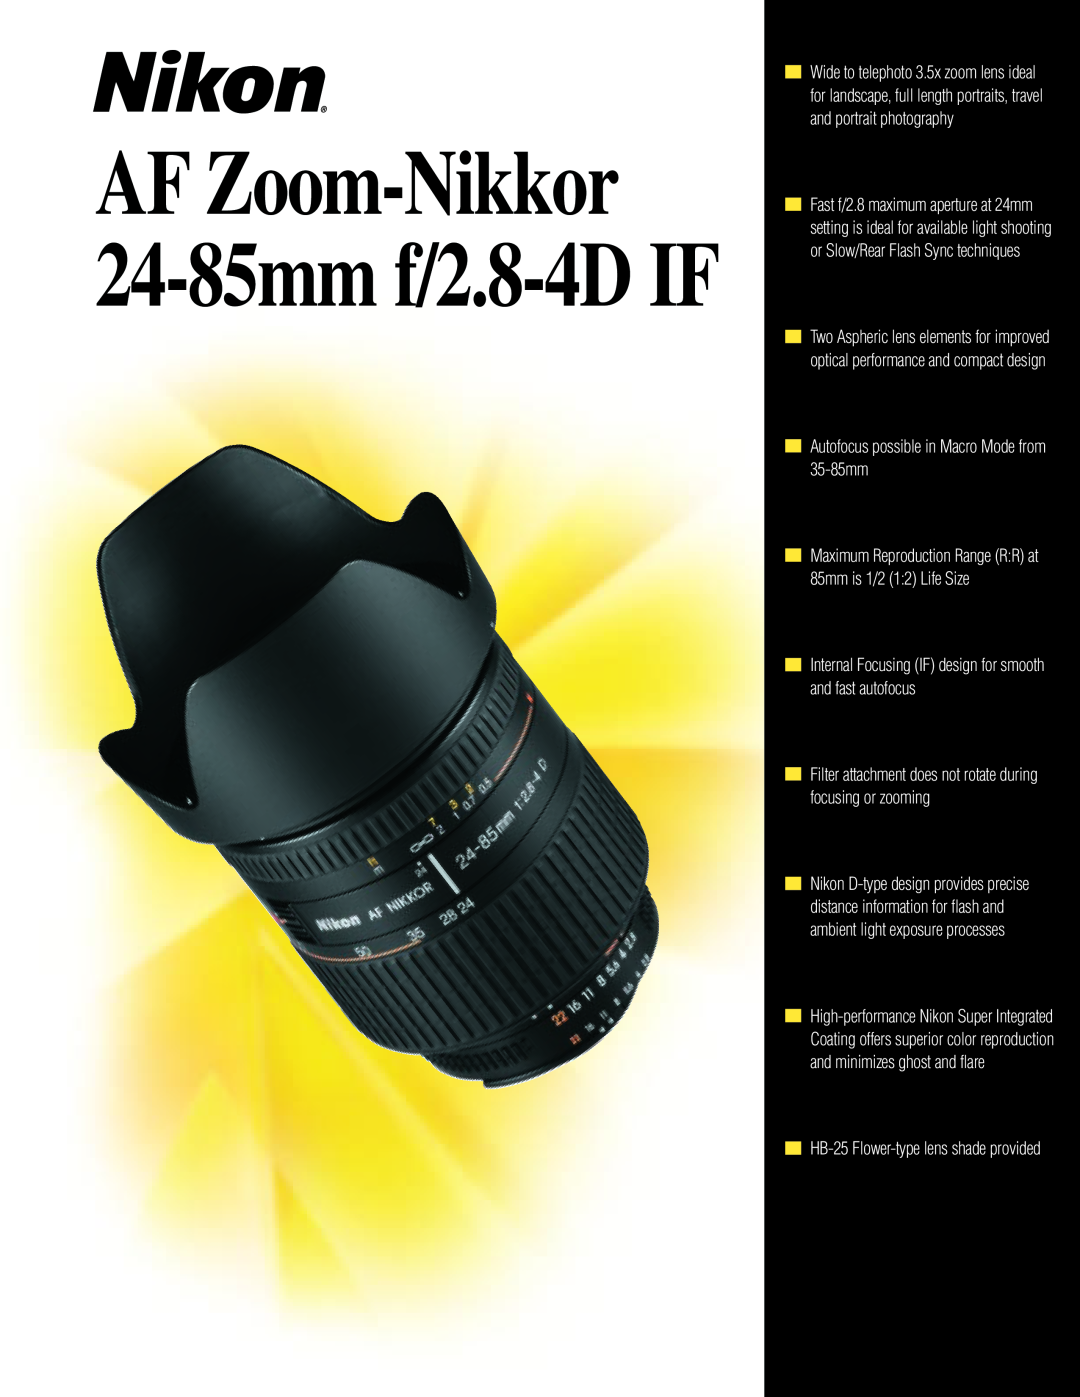 Nikon AF Zoom-Nikkor manual 24-85mm f/2.8-4D IF, Autofocus possible in Macro Mode from 35-85mm 